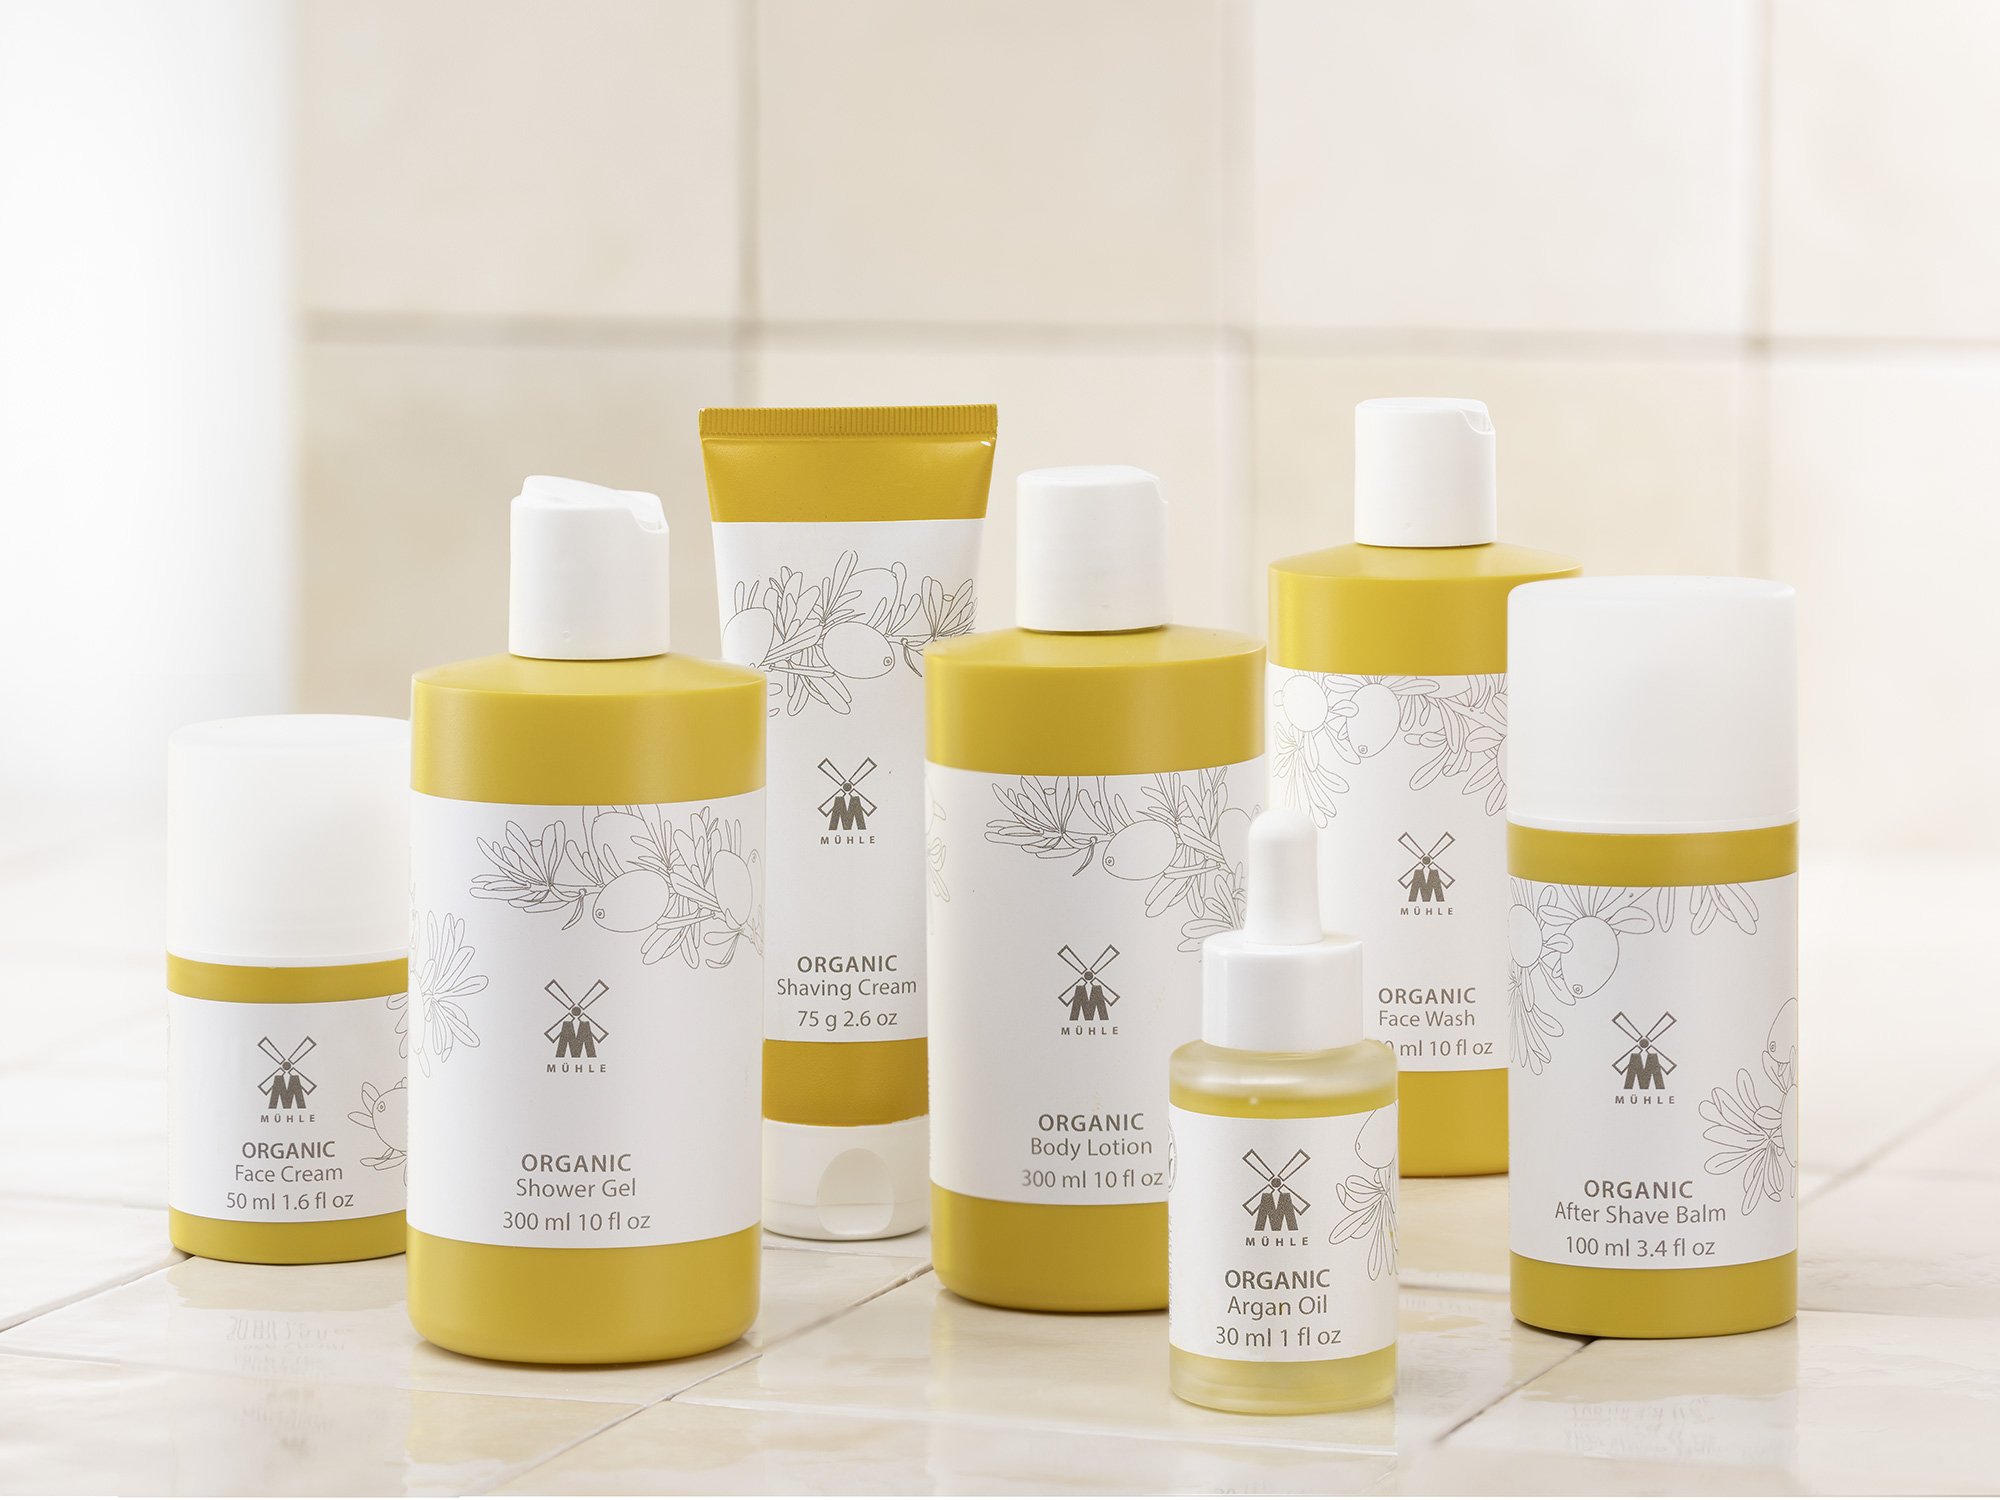 ORGANIC natural cosmetics range with a new design